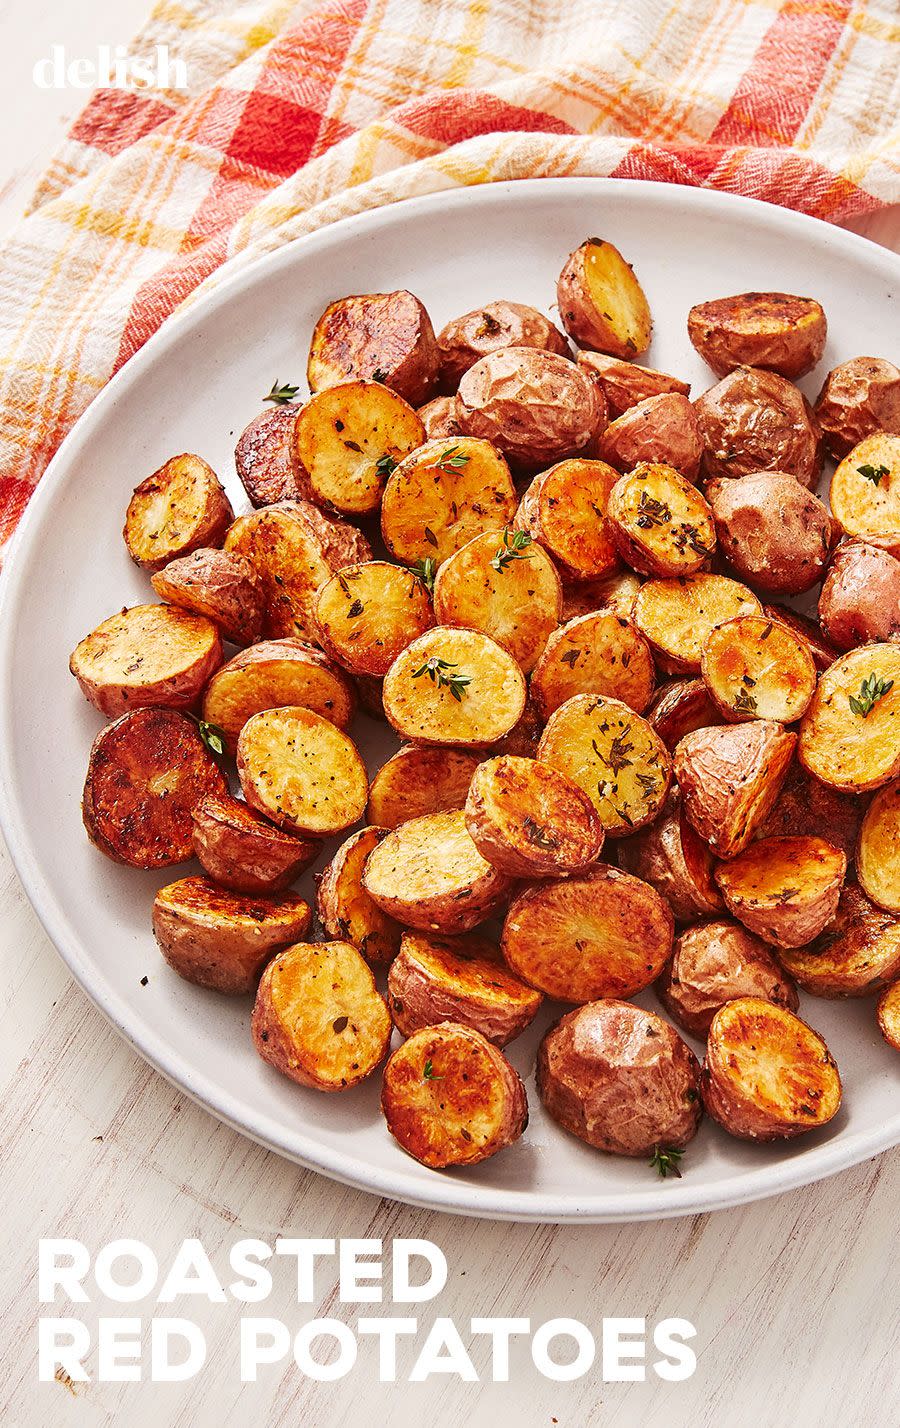 <p>Golden and crisp potatoes are possible with this recipe.</p><p>Get the recipe from <a href="https://www.delish.com/cooking/recipe-ideas/a29787990/roasted-red-potatoes-recipe/" rel="nofollow noopener" target="_blank" data-ylk="slk:Delish" class="link rapid-noclick-resp">Delish</a>.</p>